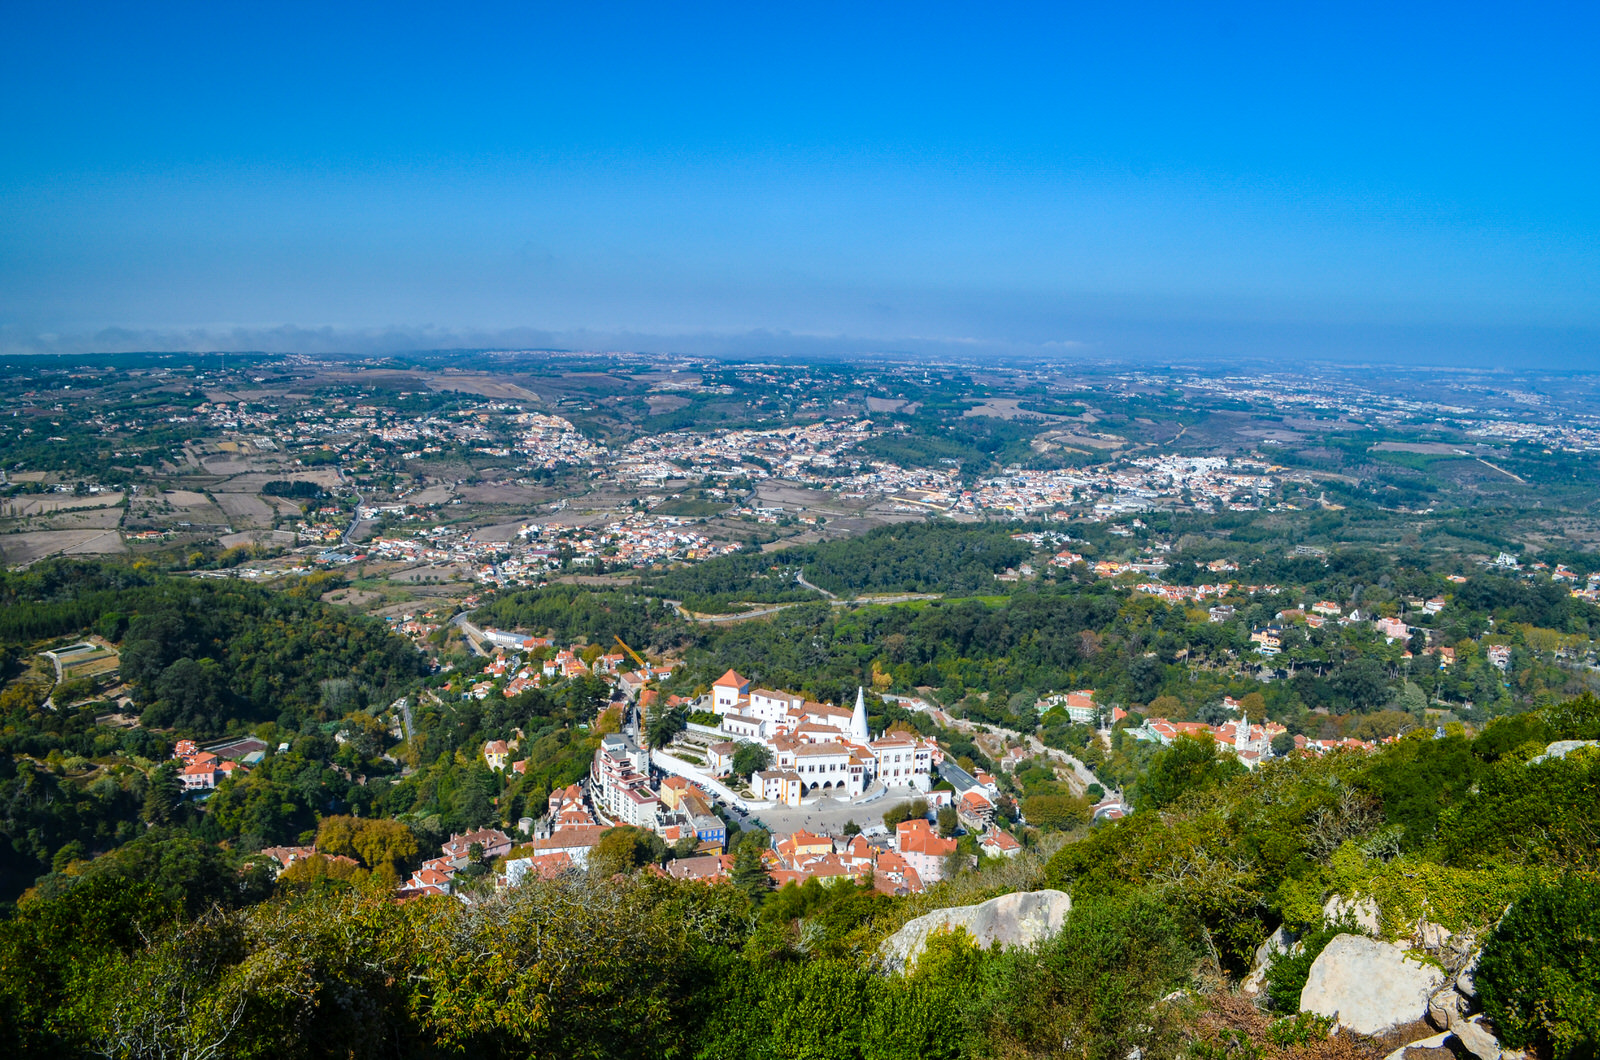 24 Hours in Sintra: View of the historic centre of Sintra, Portugal from the Moorish Castle